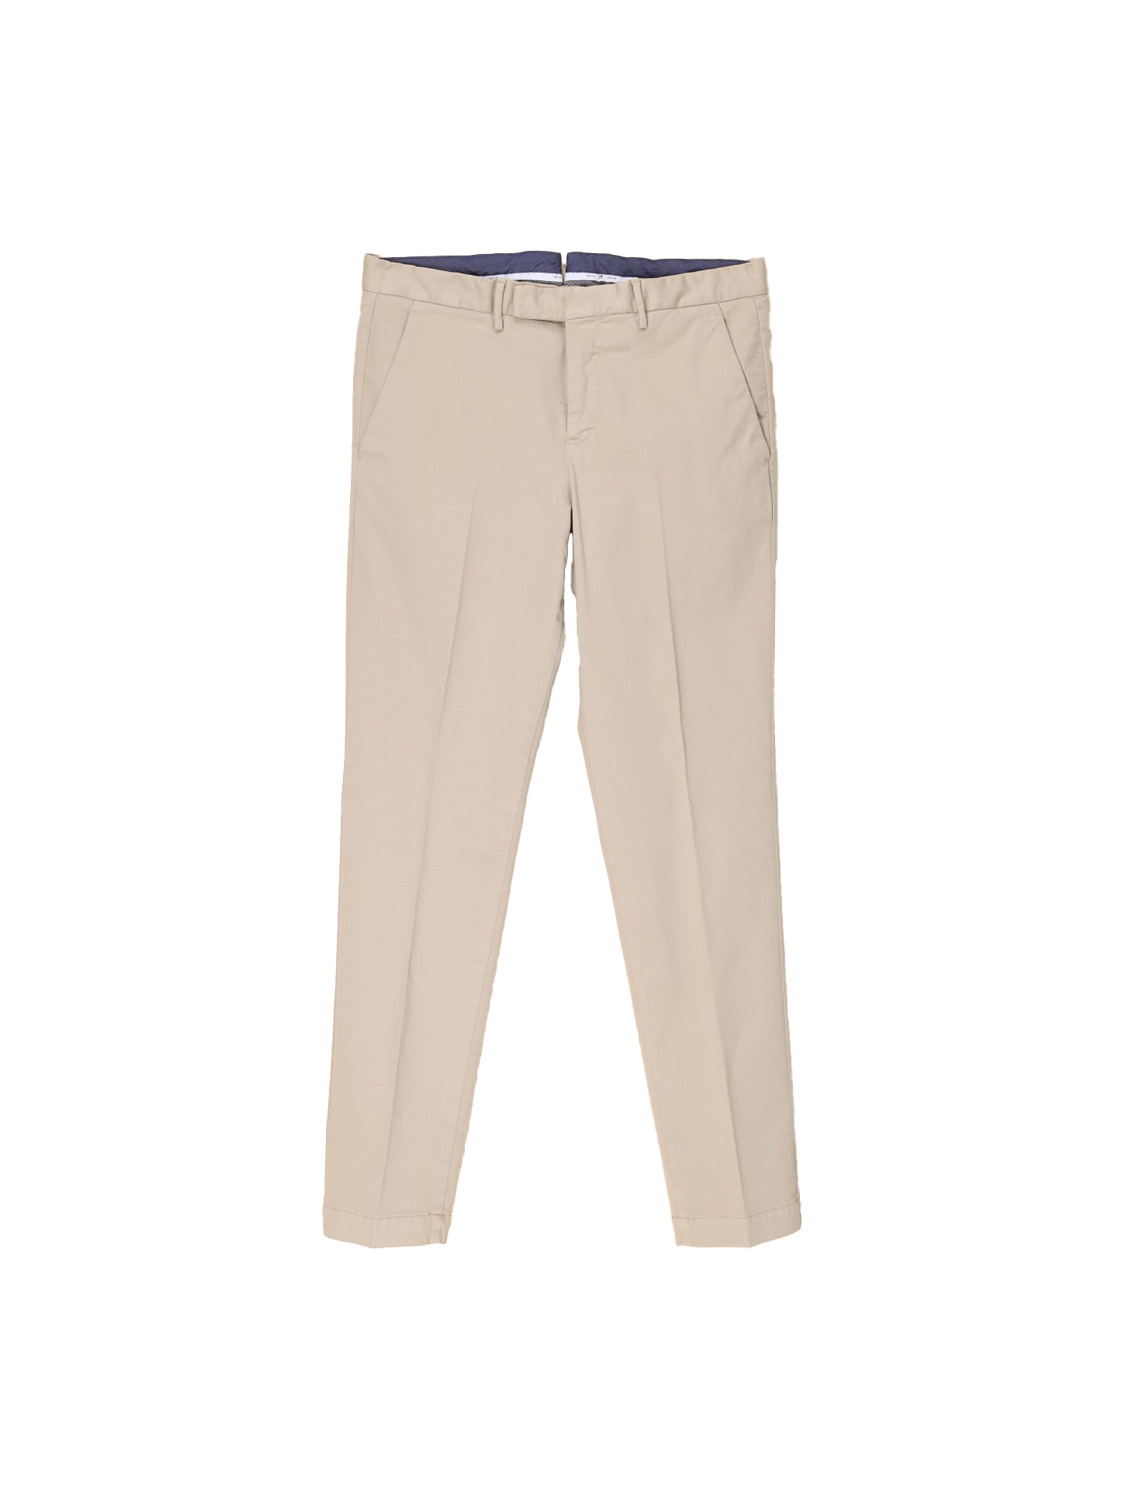 PT Torino Stretchy cotton trousers in chino style  beige 48